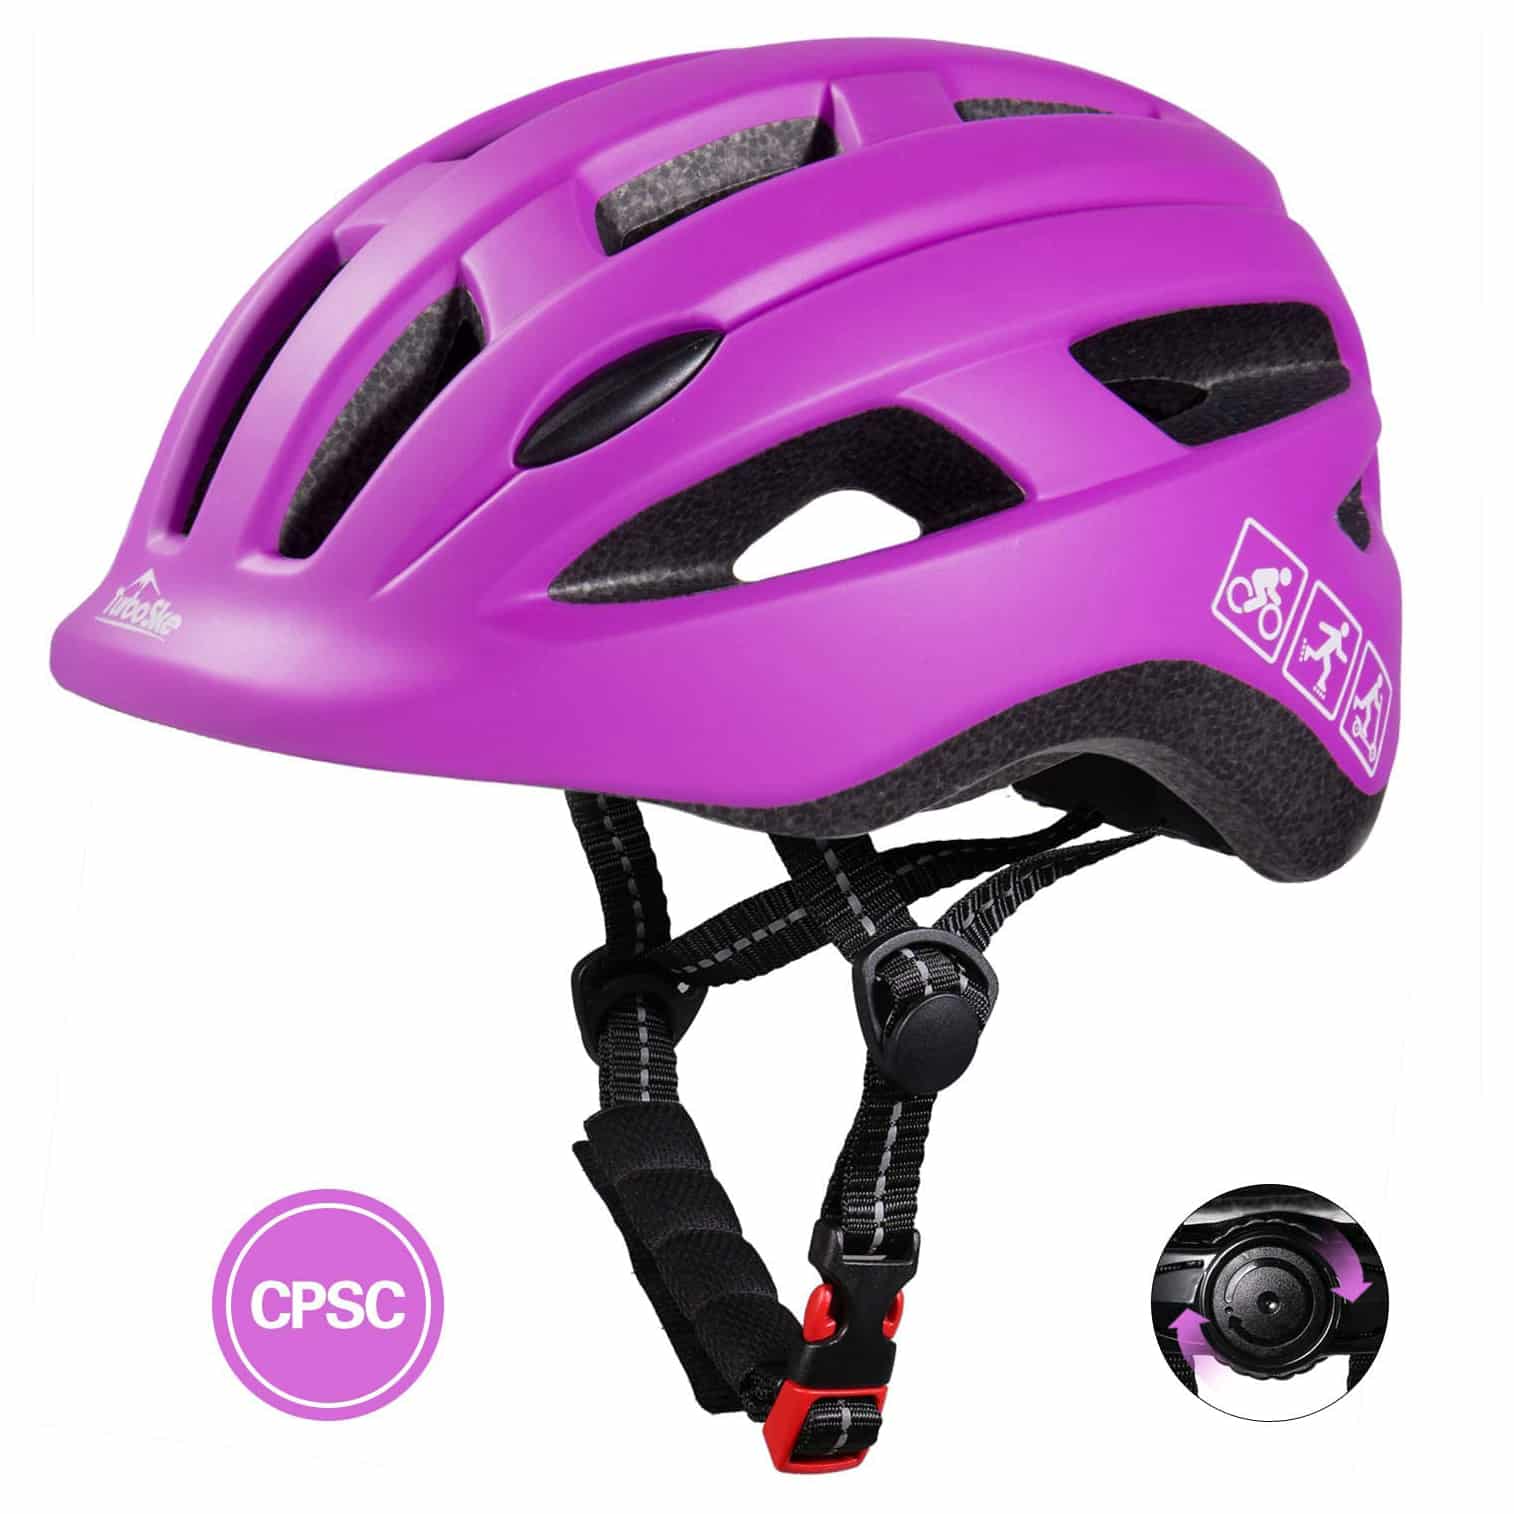 Top 10 Best Kids Helmets in 2021 Reviews - Go On Products